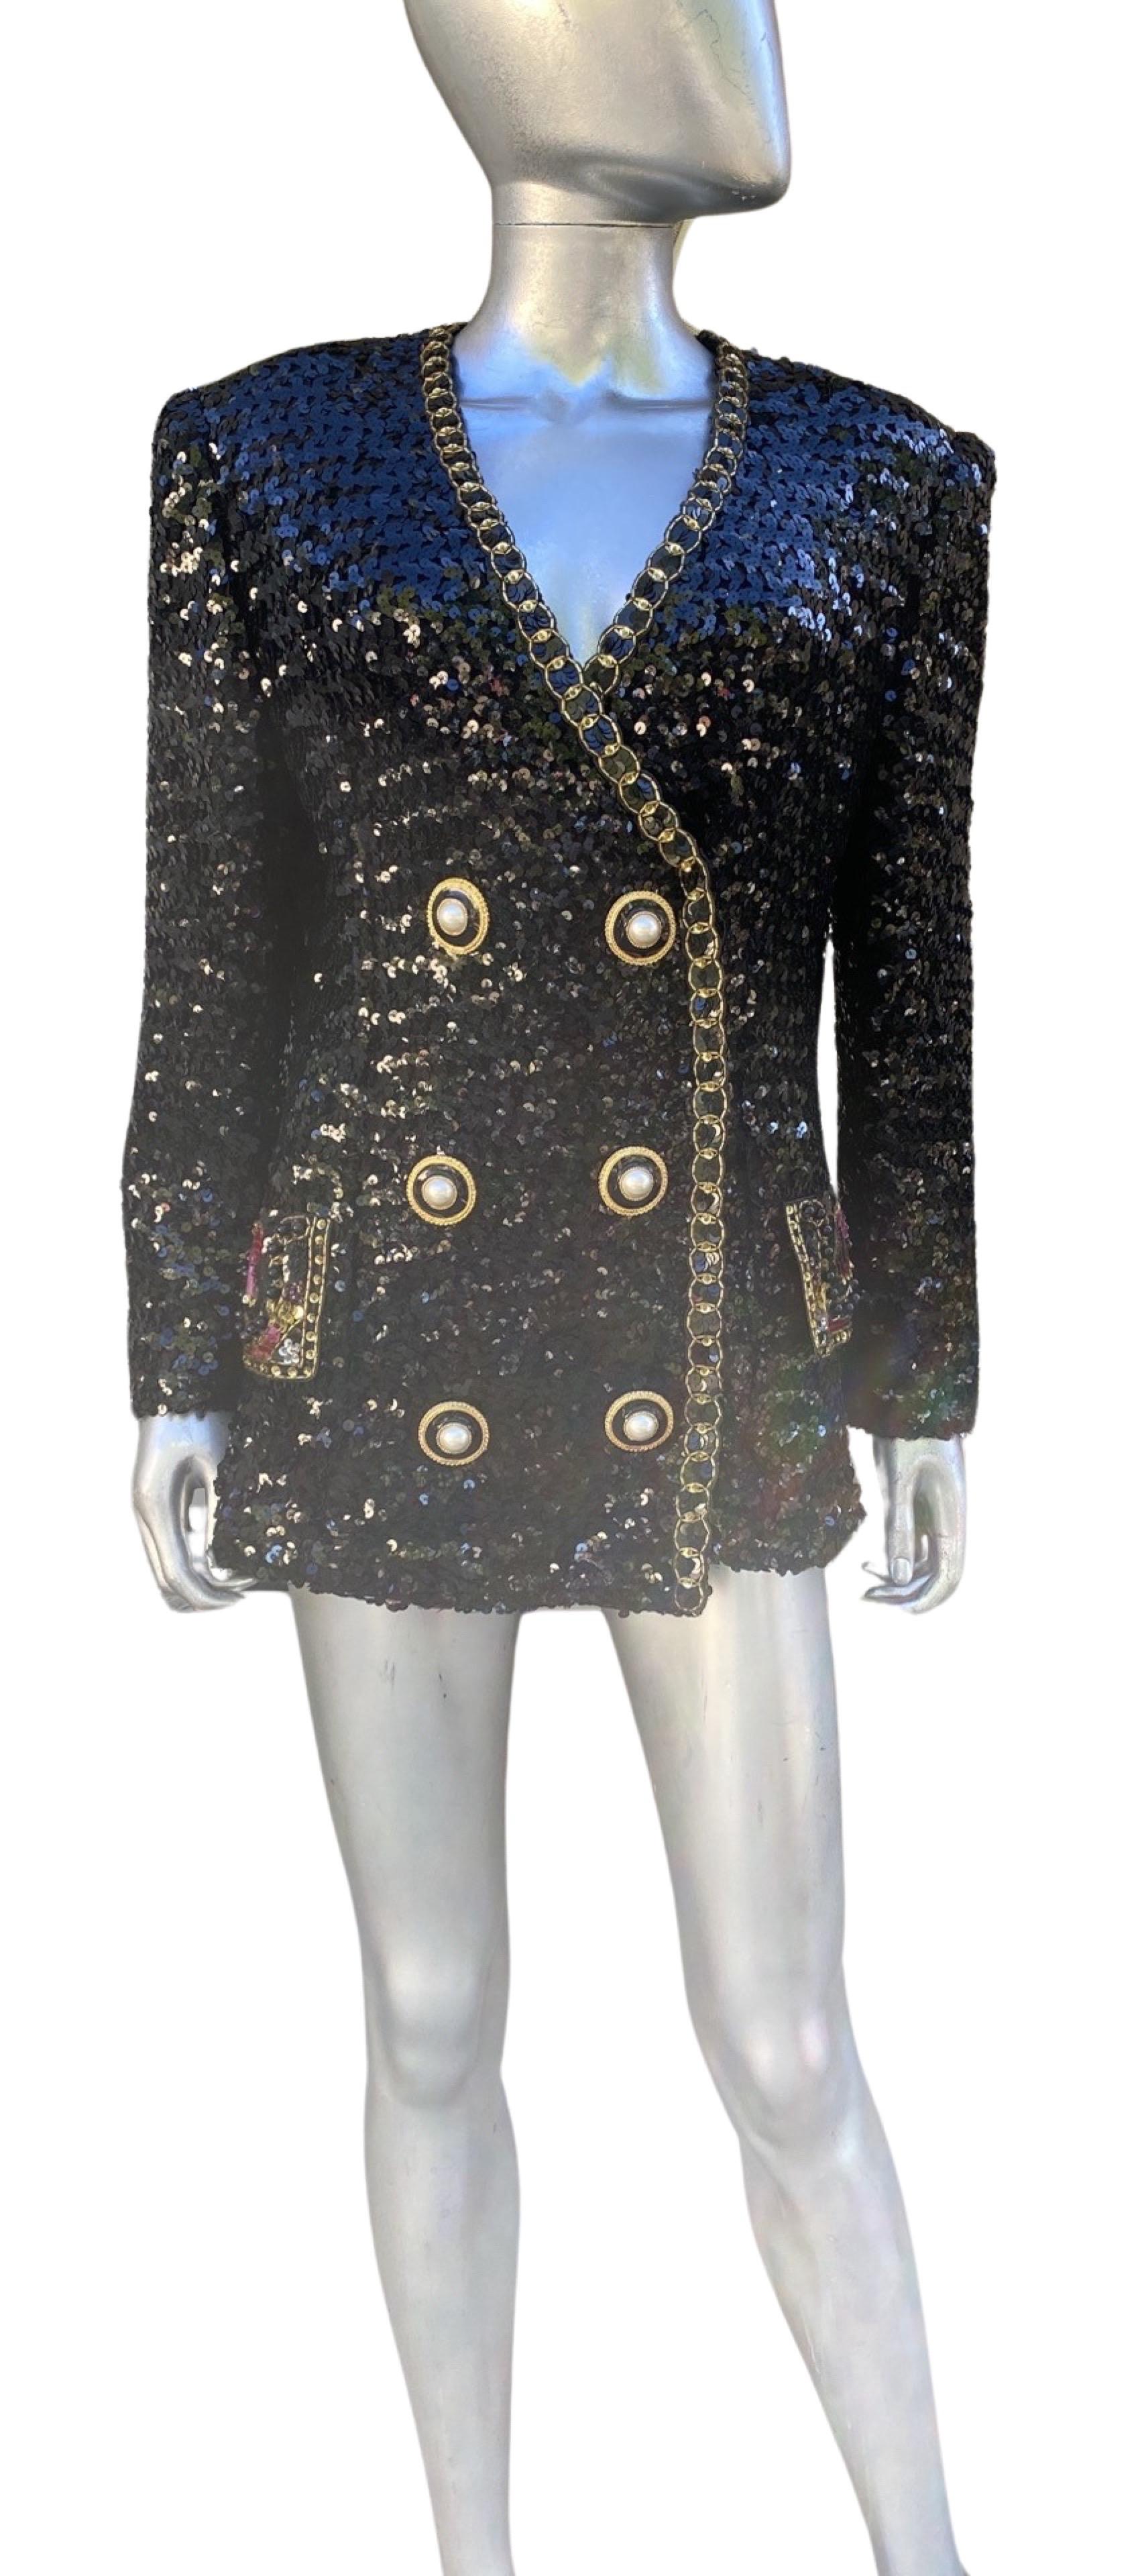 Lillie Rubin Vintage Sequin Jacket with Spectacular Trim/Buttons Size 12-14 For Sale 5